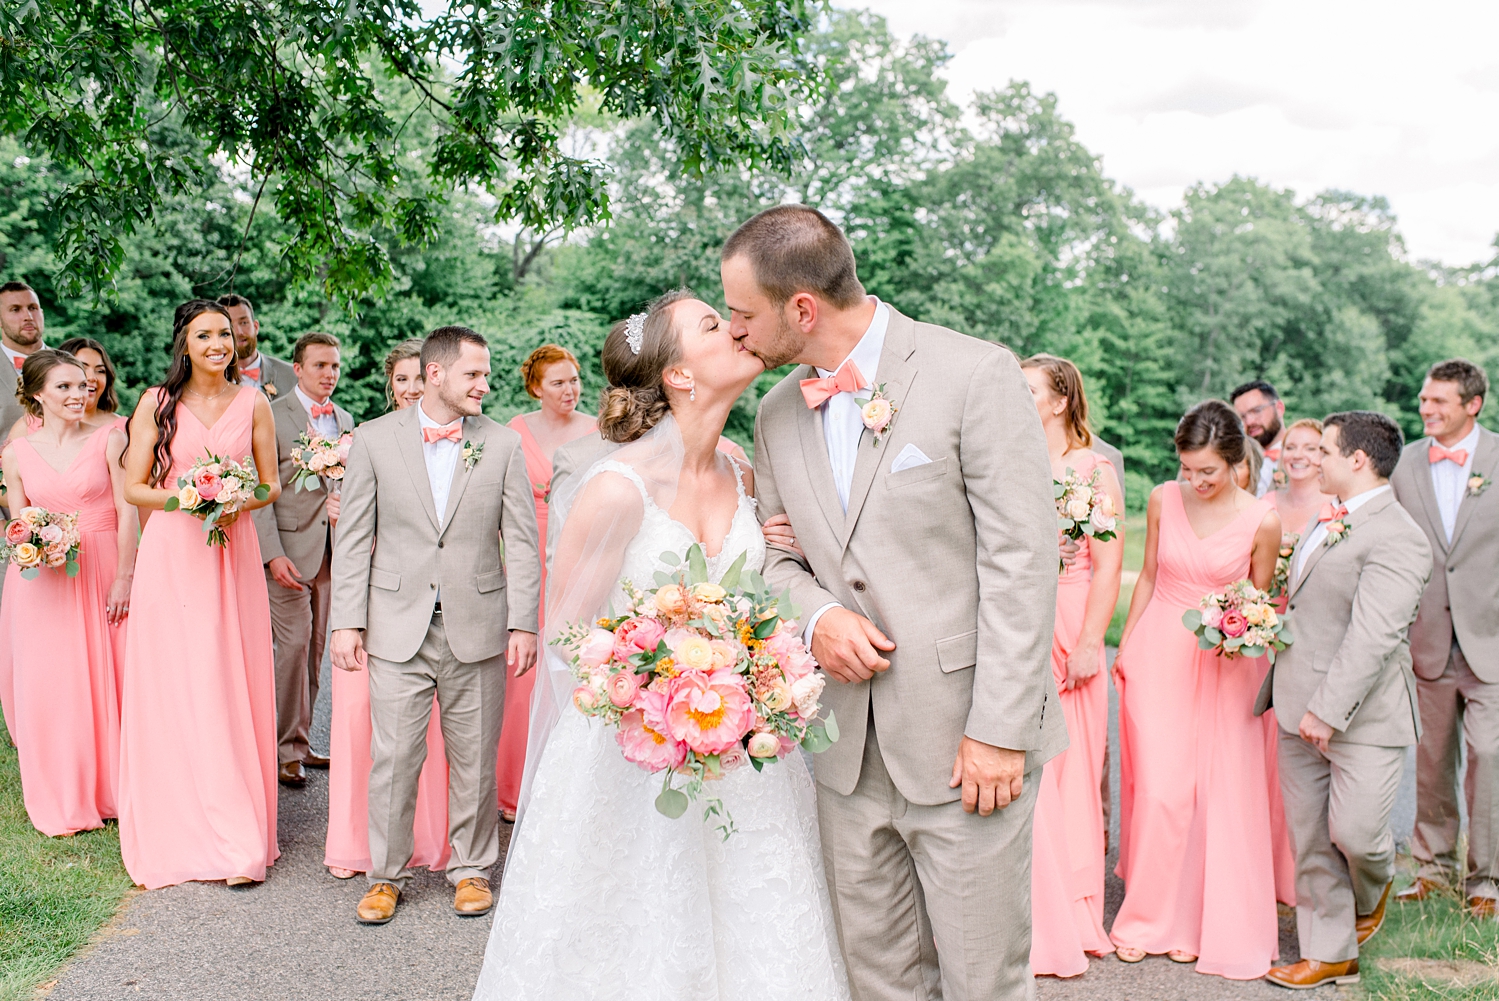 Romantic Garden Themed, Peach and Coral Summertime Wedding by Erika Christine Photography. Large Bridal Party